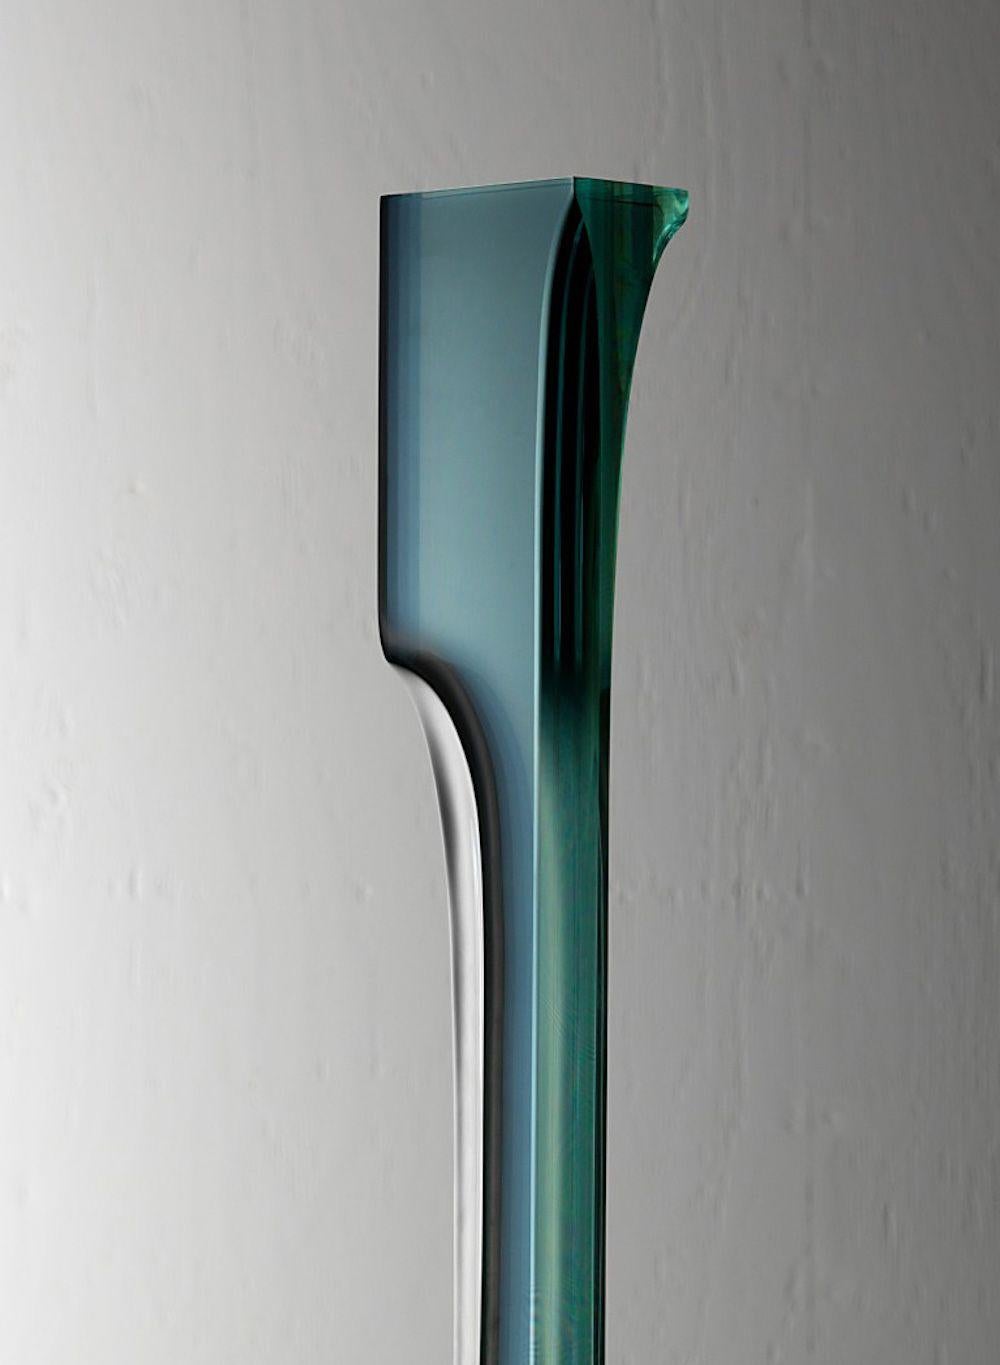 M.140801 by Toshio Iezumi - Contemporary glass sculpture, green, abstract For Sale 4